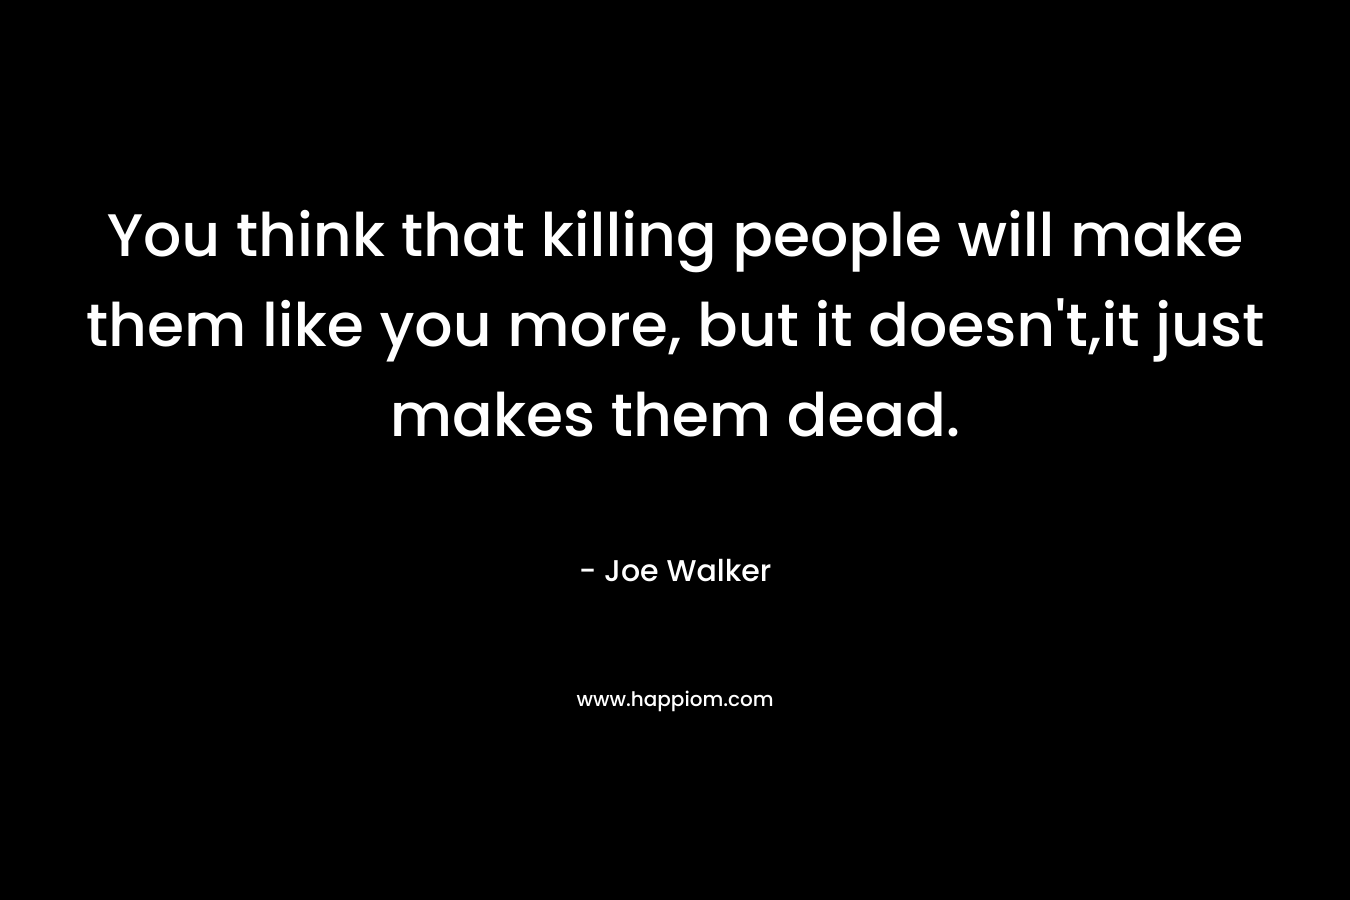 You think that killing people will make them like you more, but it doesn't,it just makes them dead.